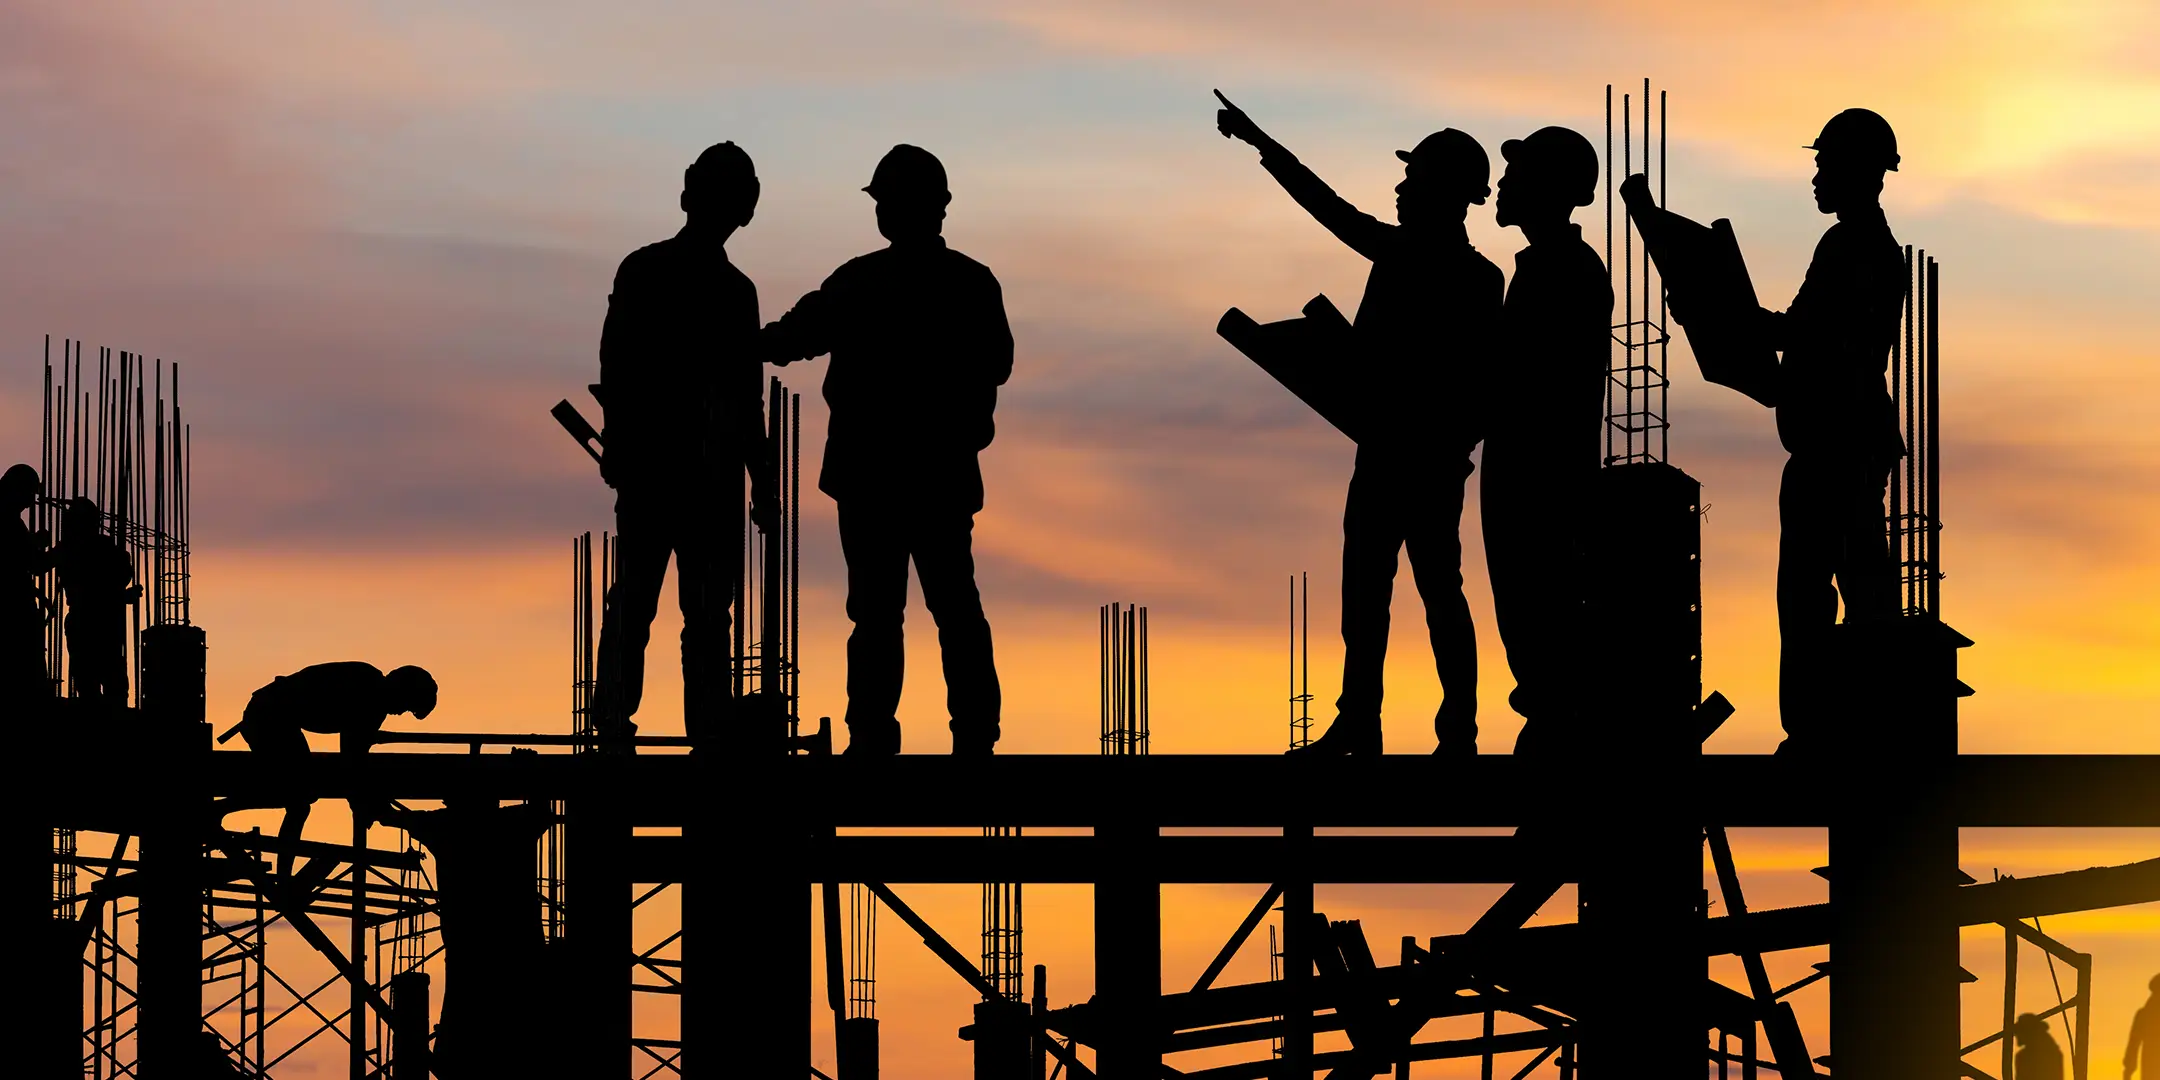 Silhouette of workers on building site construction site at sunset in evening time